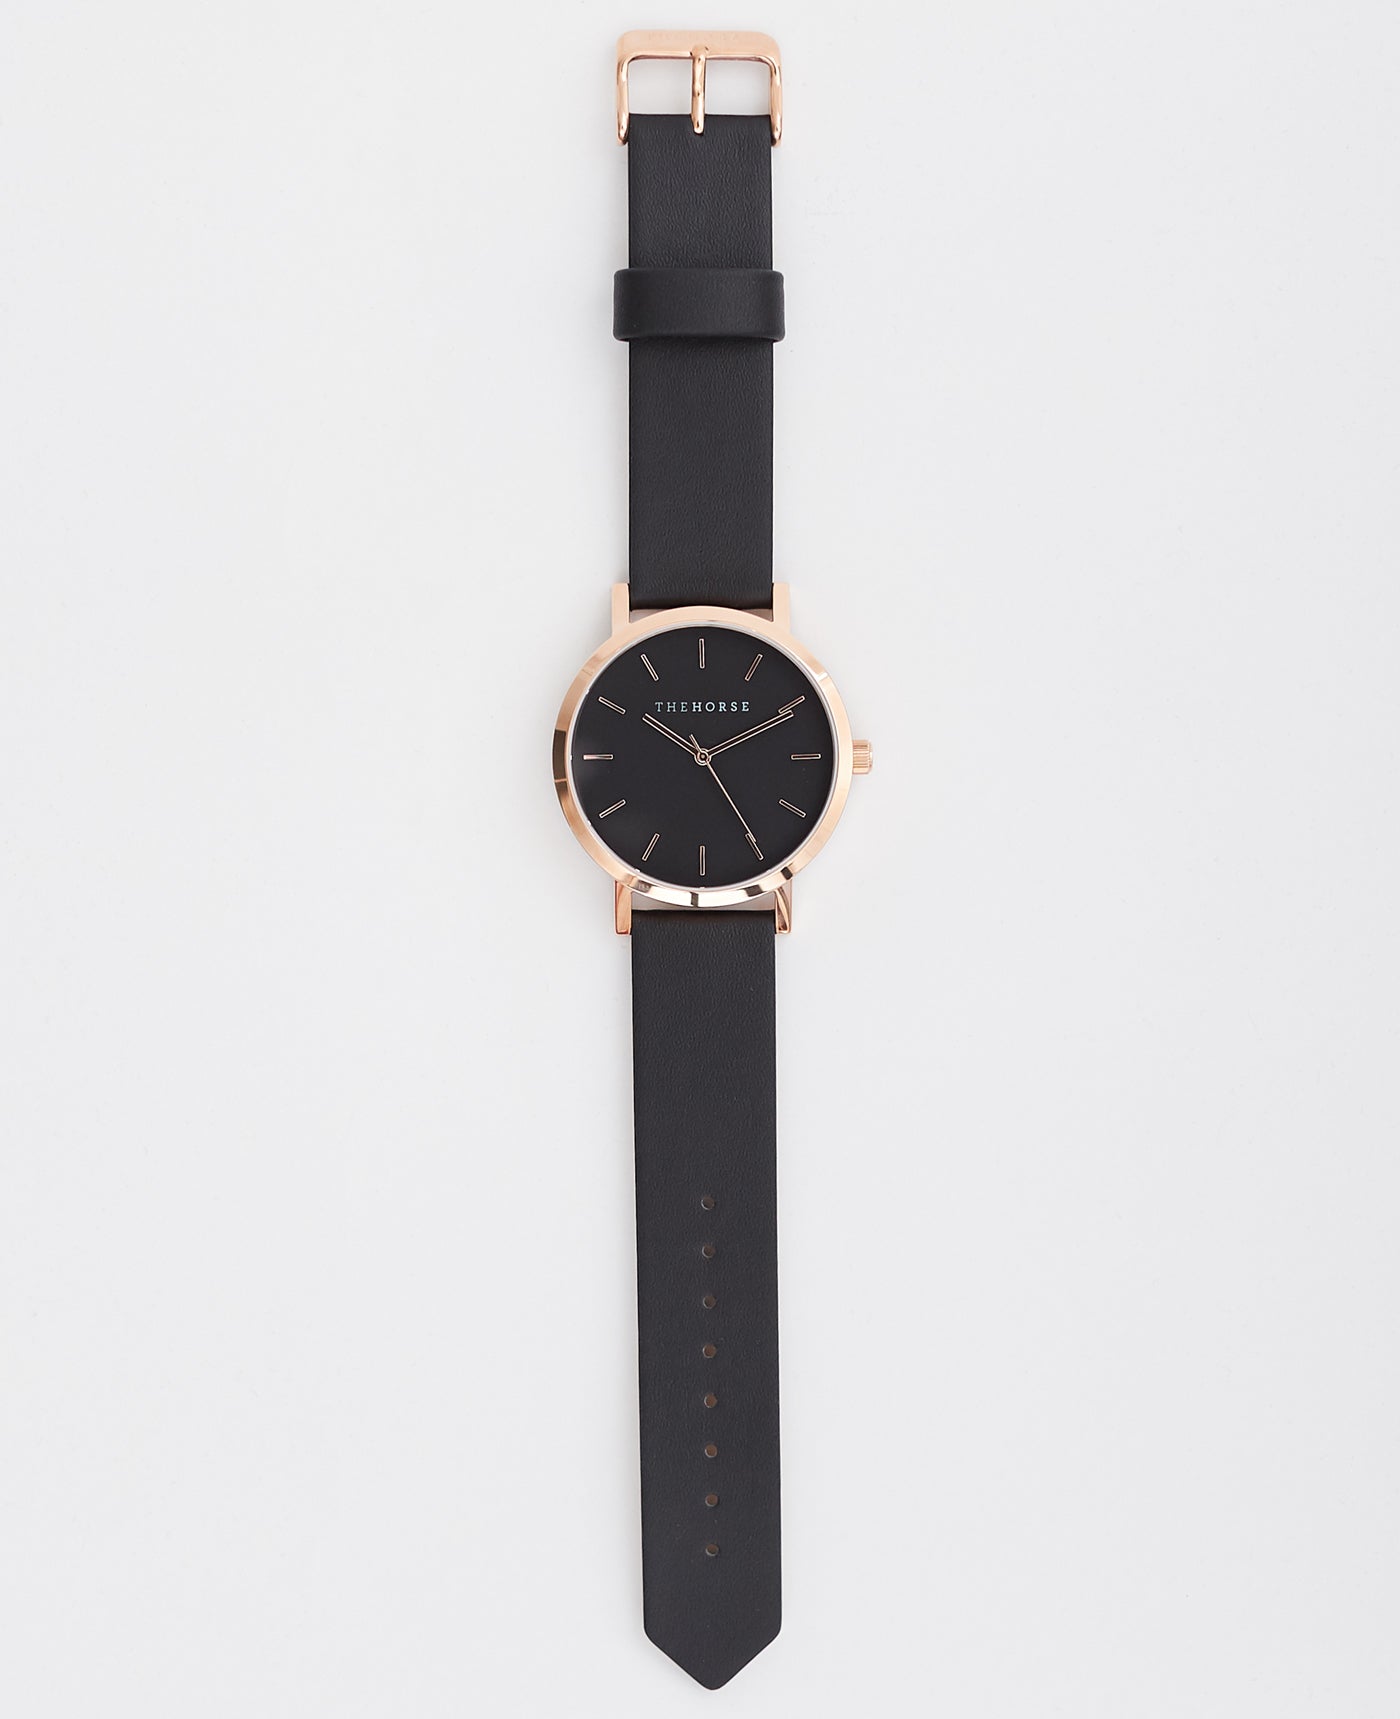 The Original Watch Rose Gold / Black Face / Black Leather Strap by The Horse